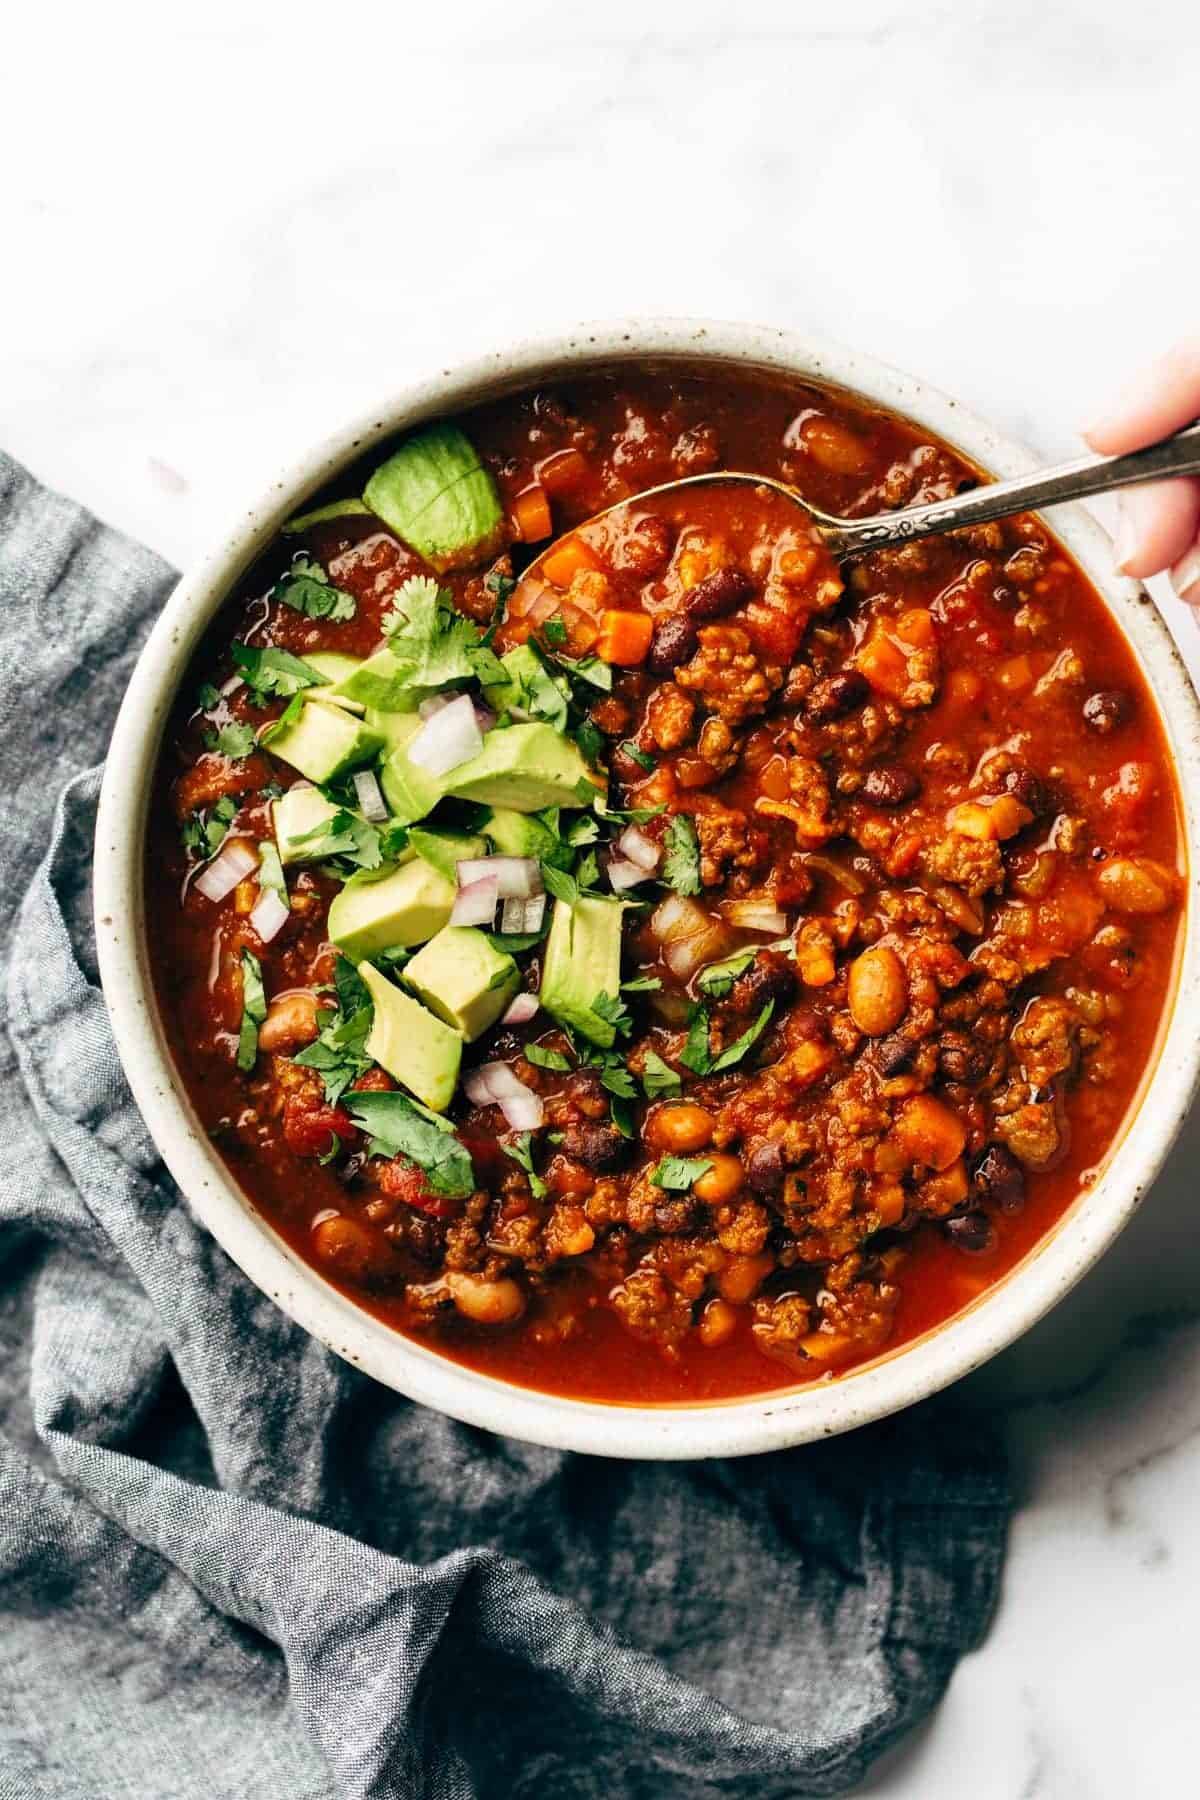 A meaty chili with beans.